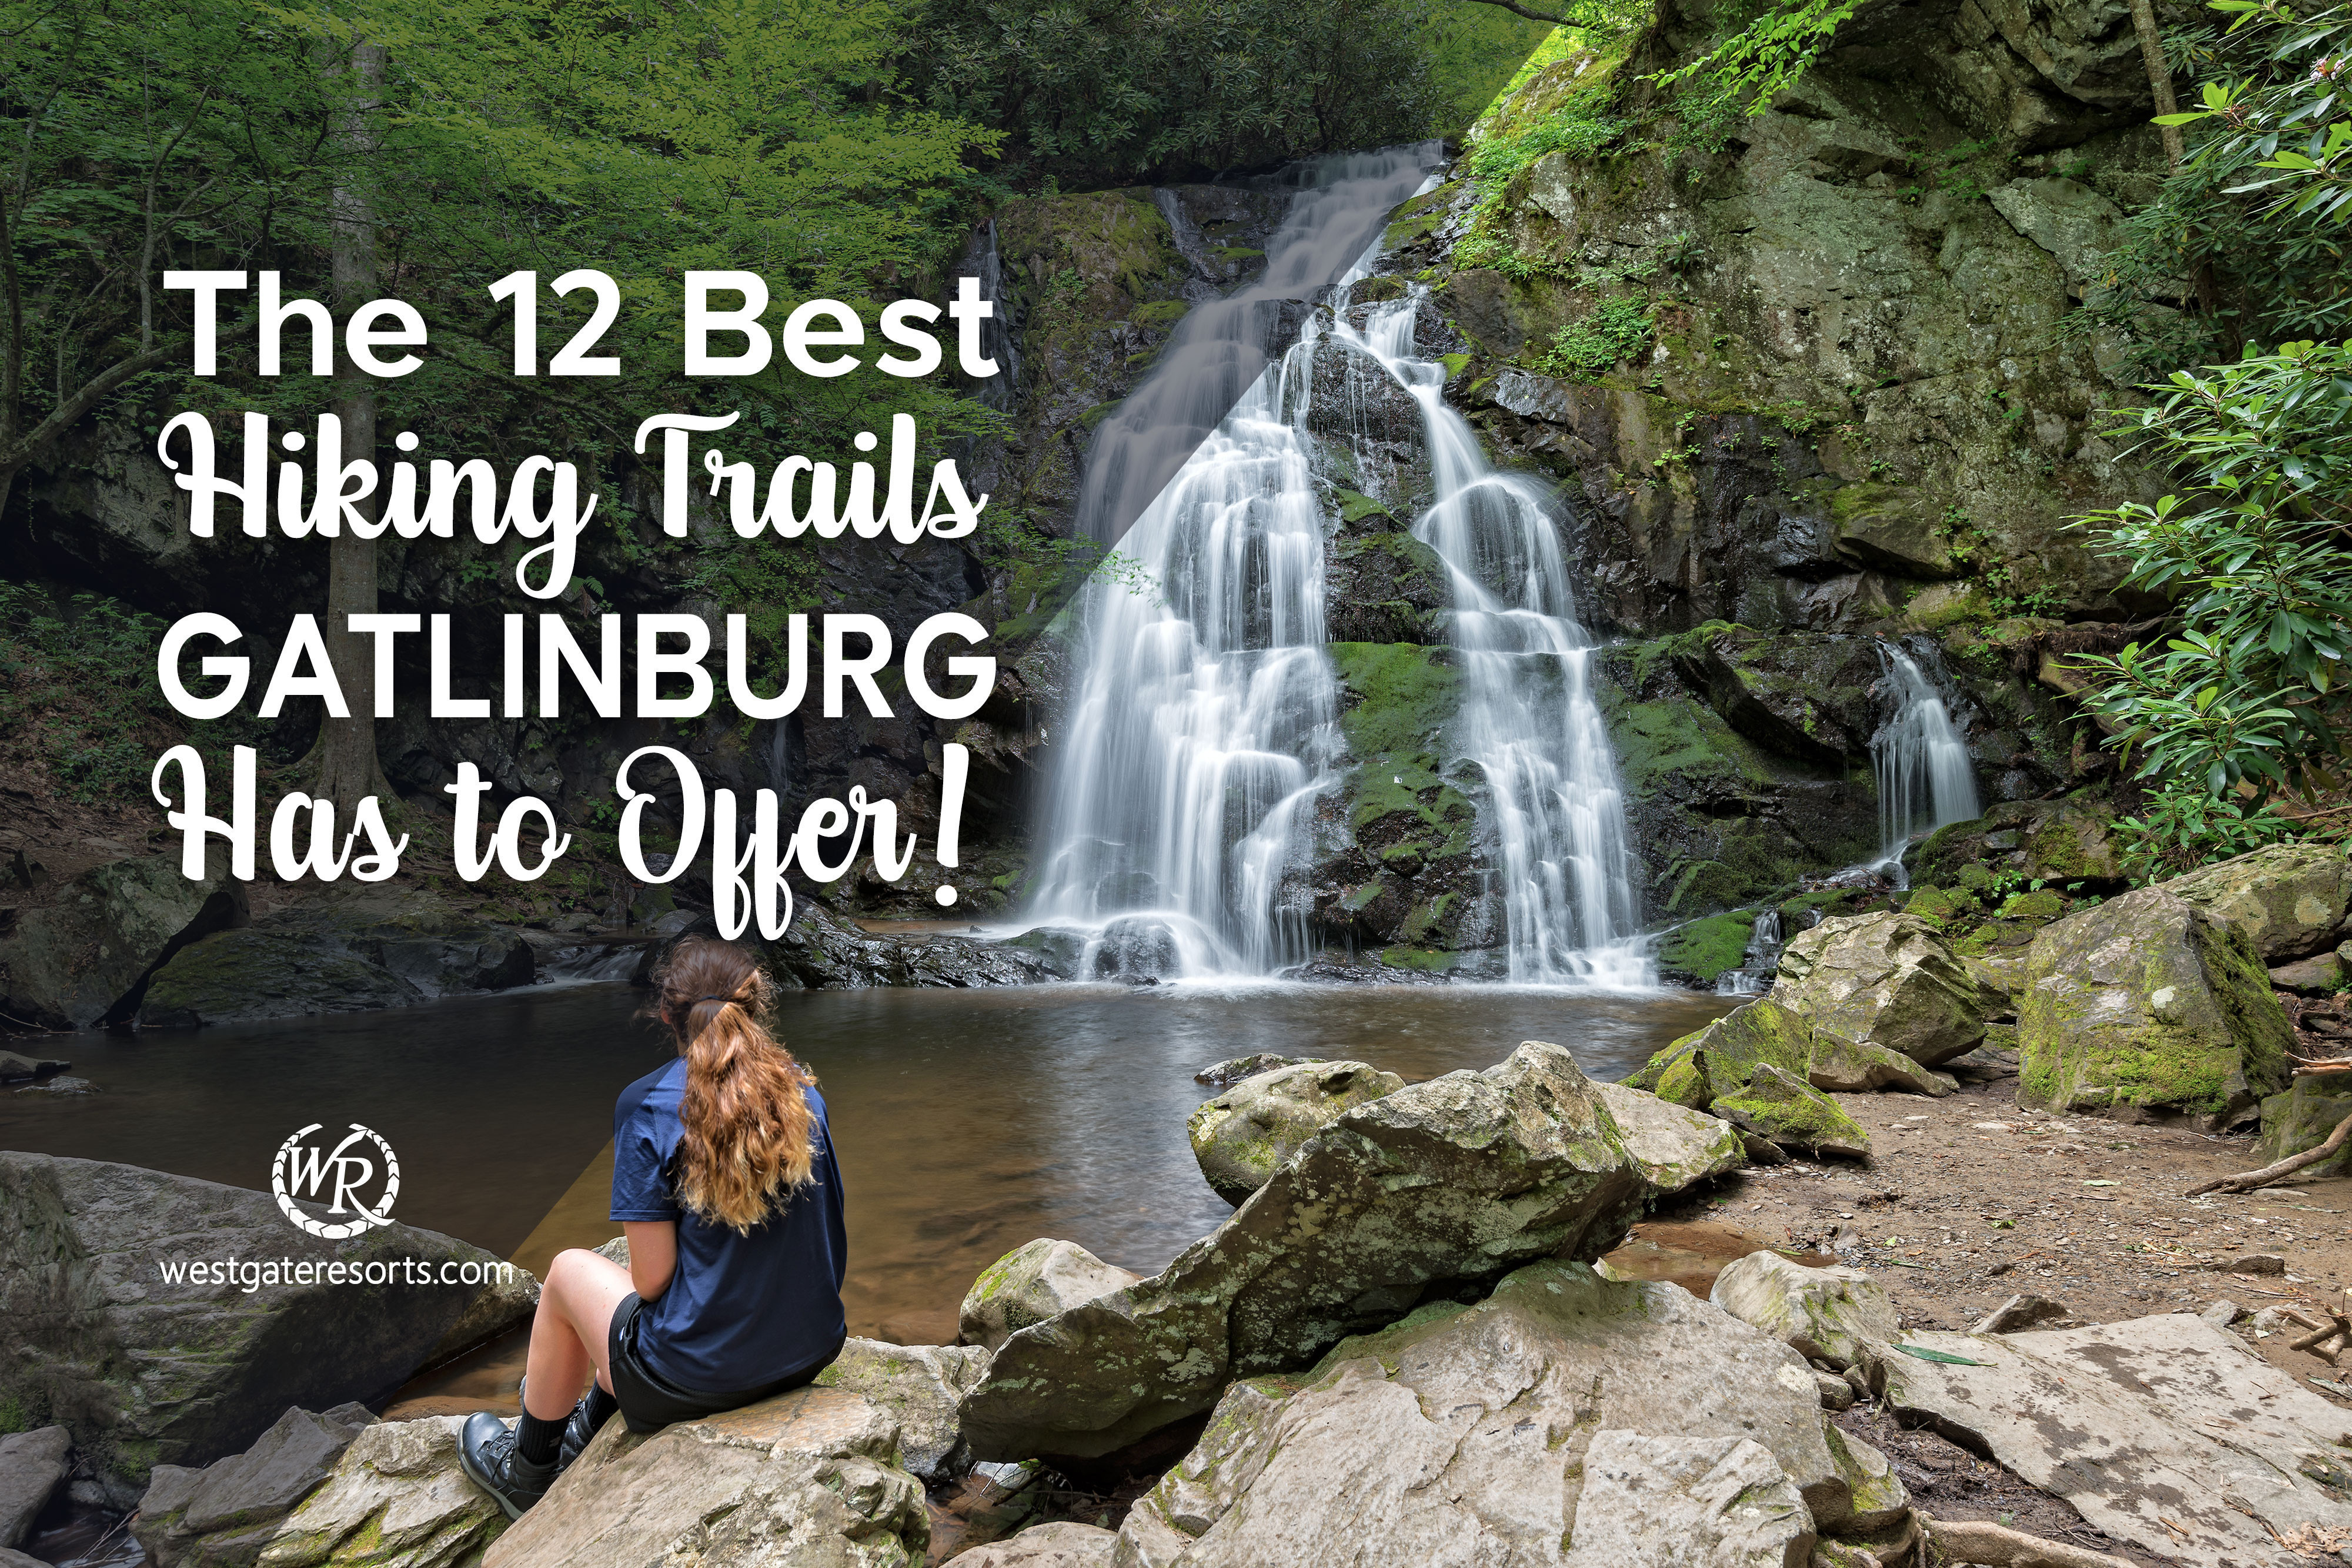 The 12 Best Hiking Trails Gatlinburg Has to Offer!